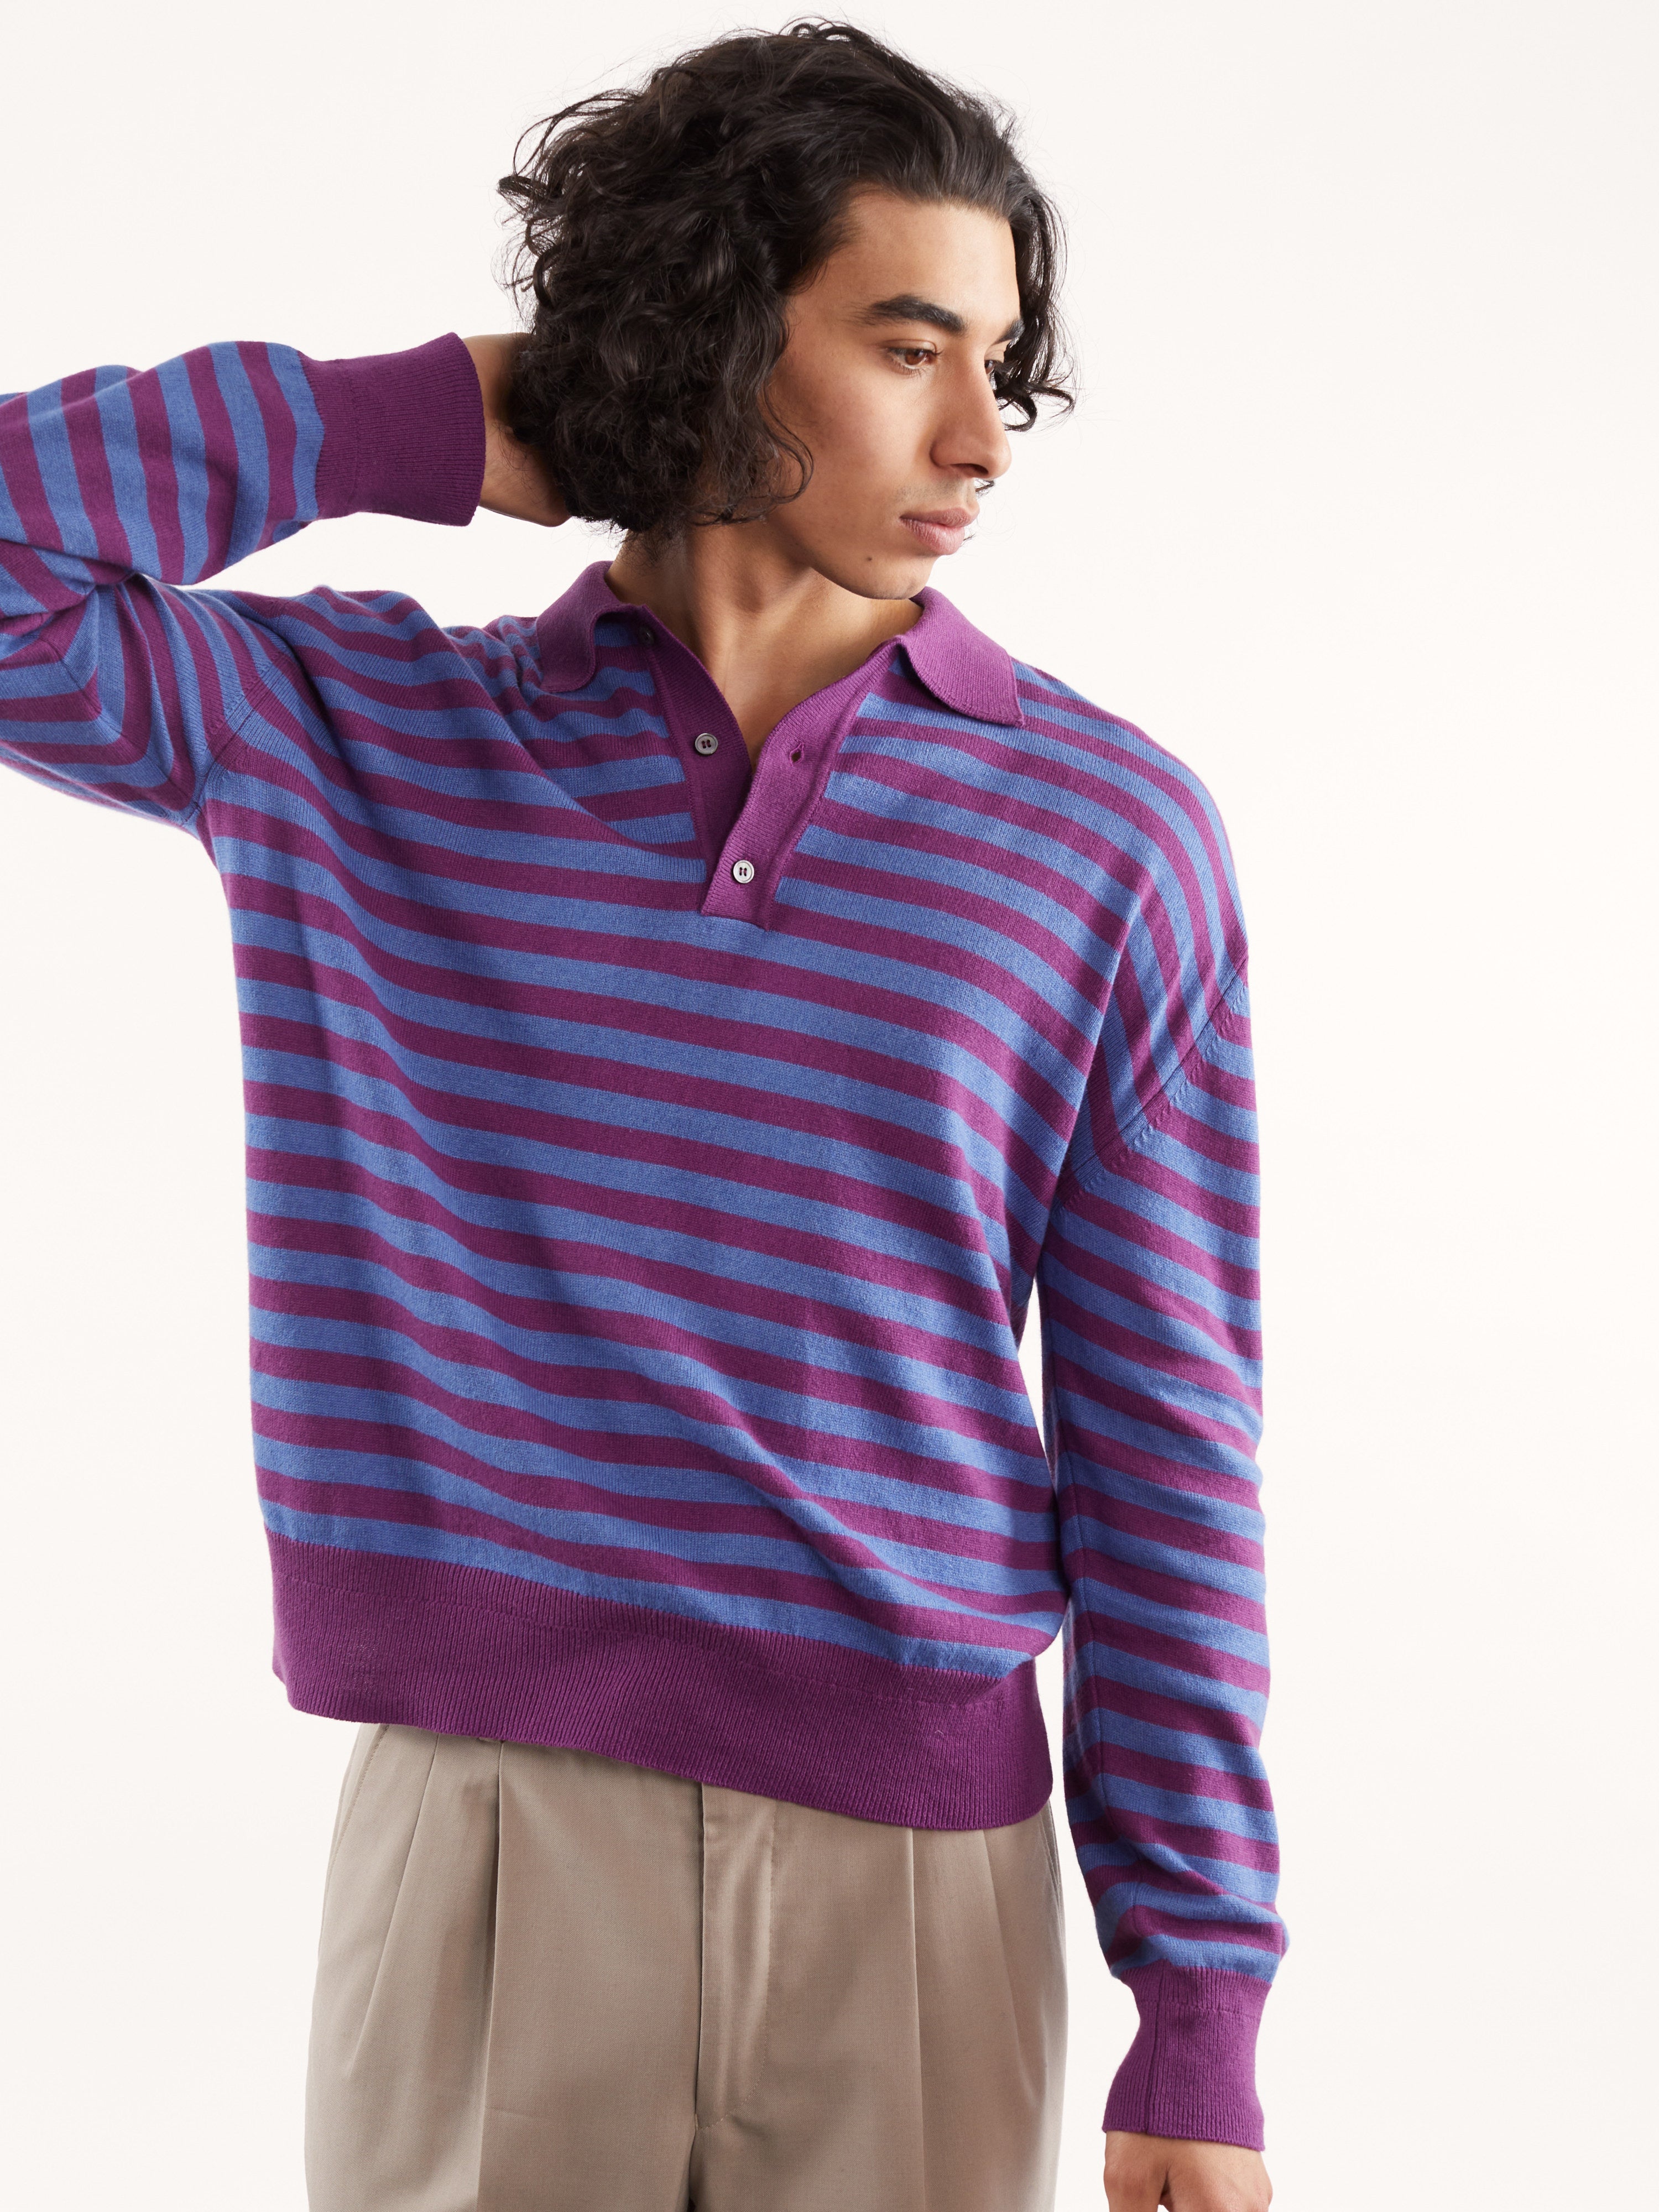 Men's striped polo shirt in recycled Cashmere and Magenta cotton